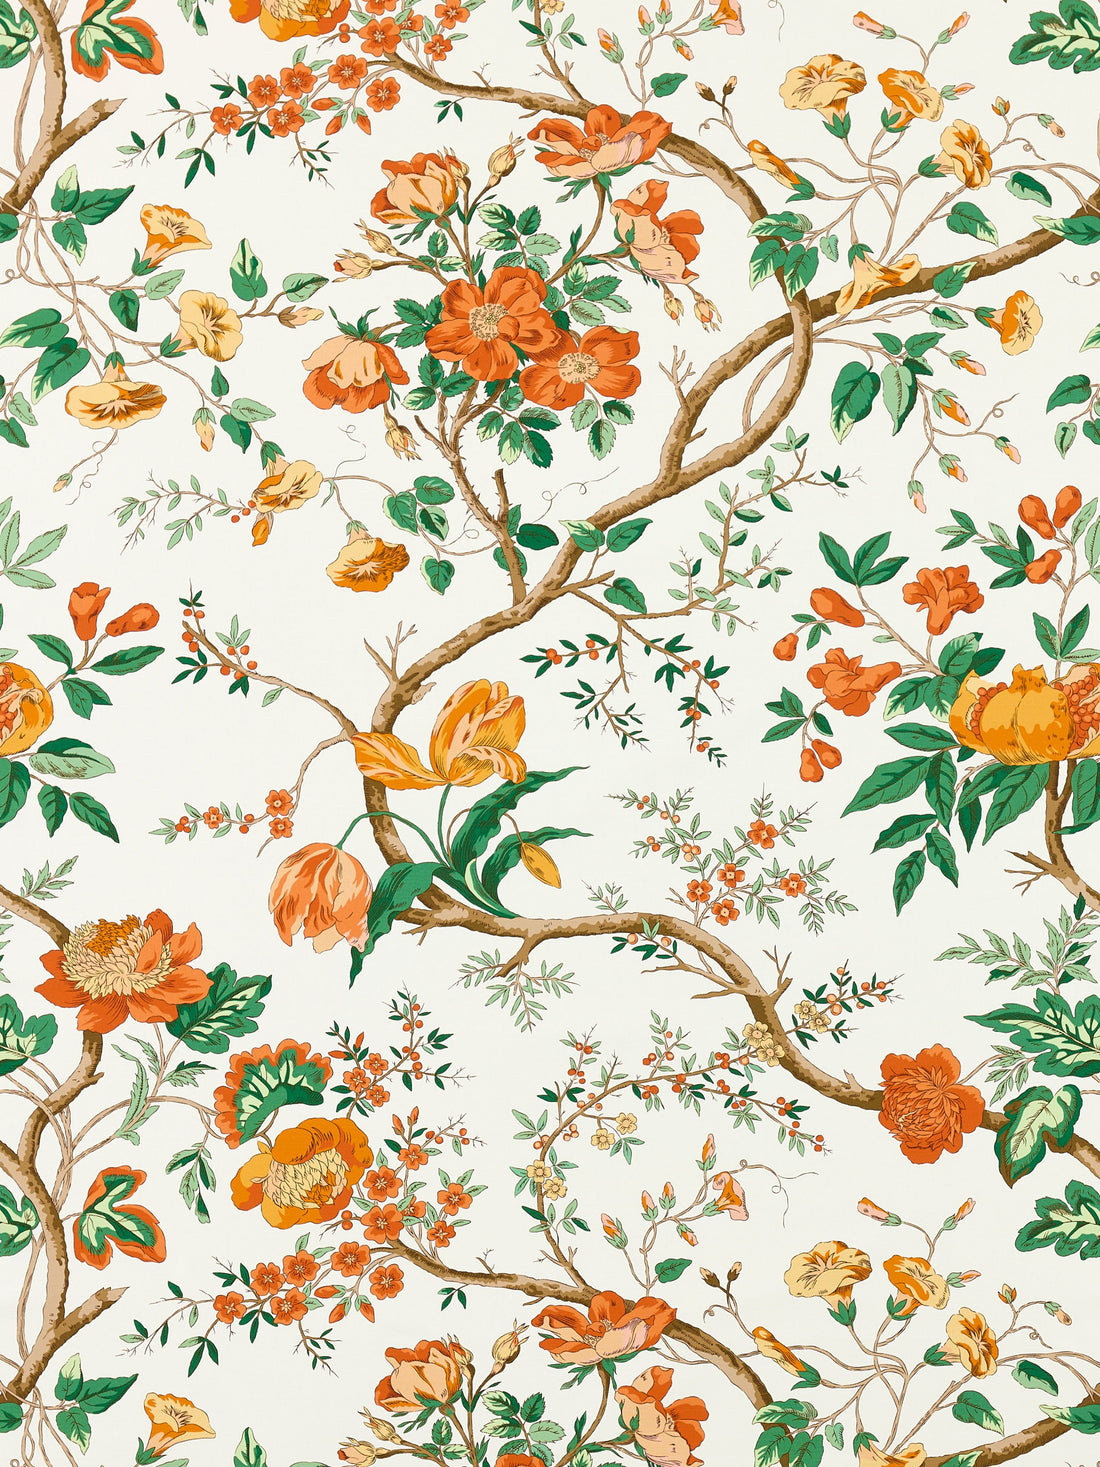 Persephone Print fabric in persimmon color - pattern number SC 000116651 - by Scalamandre in the Scalamandre Fabrics Book 1 collection